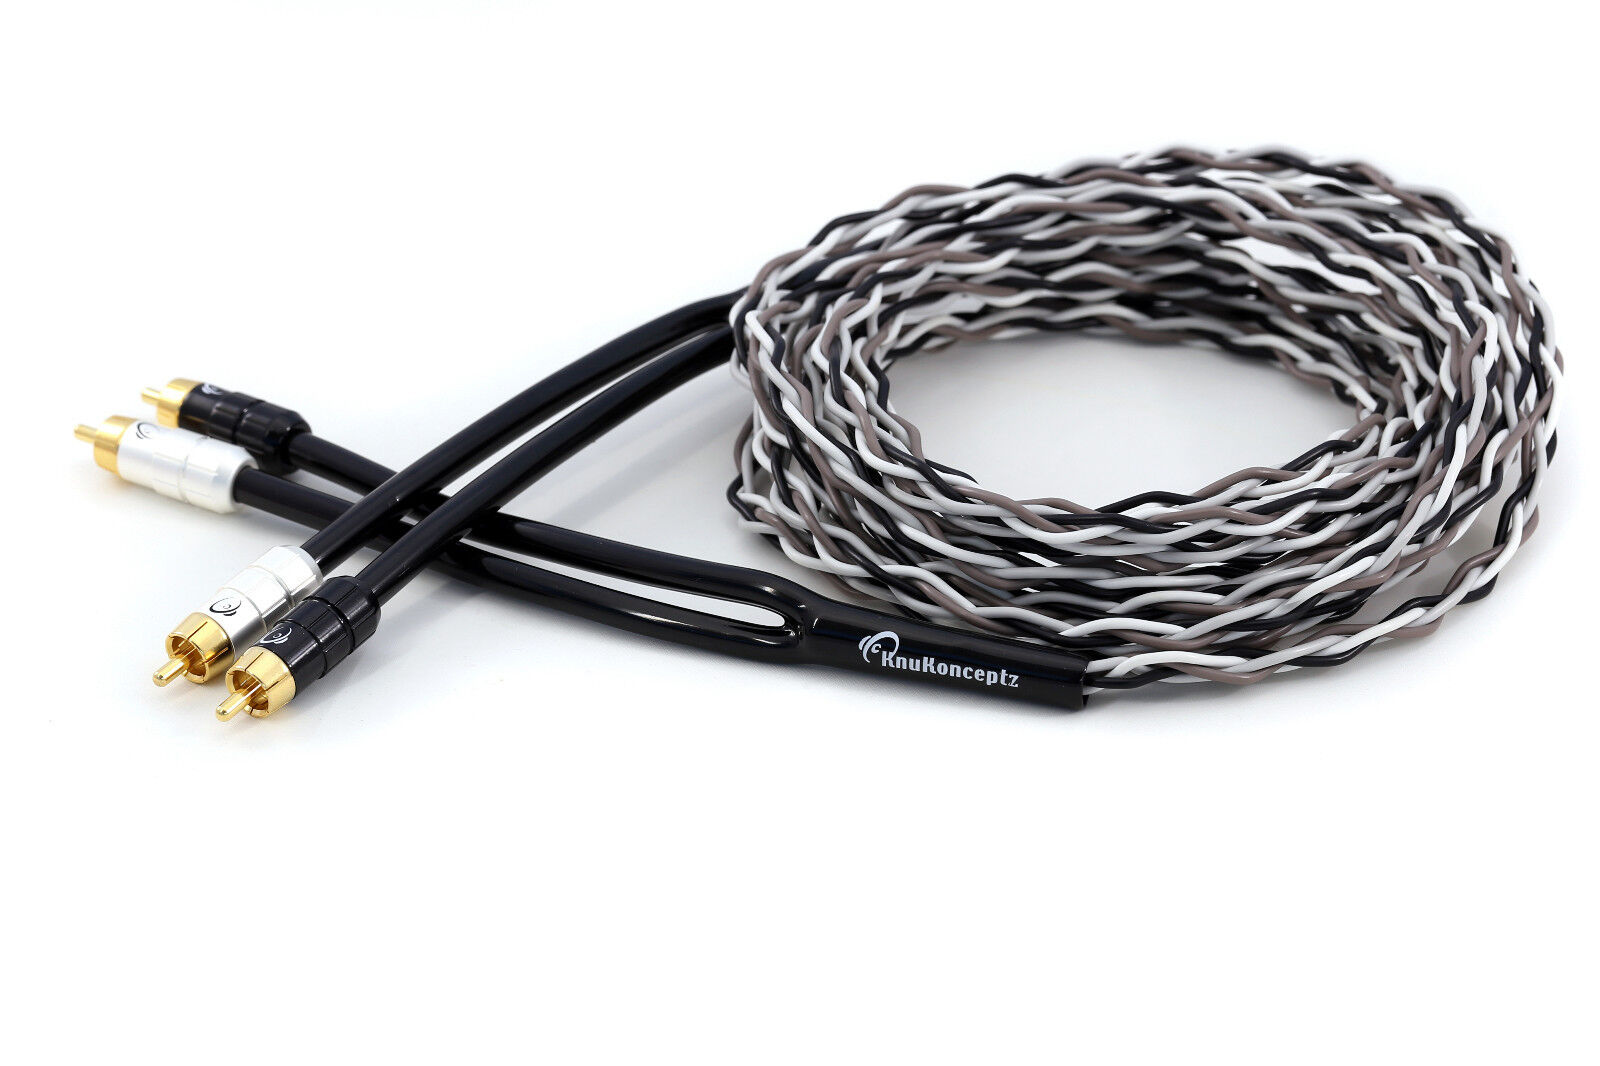 KnuKonceptz Krux Kable 5M Interlaced 3D Copper Twisted Pair RCA Cable 17FT